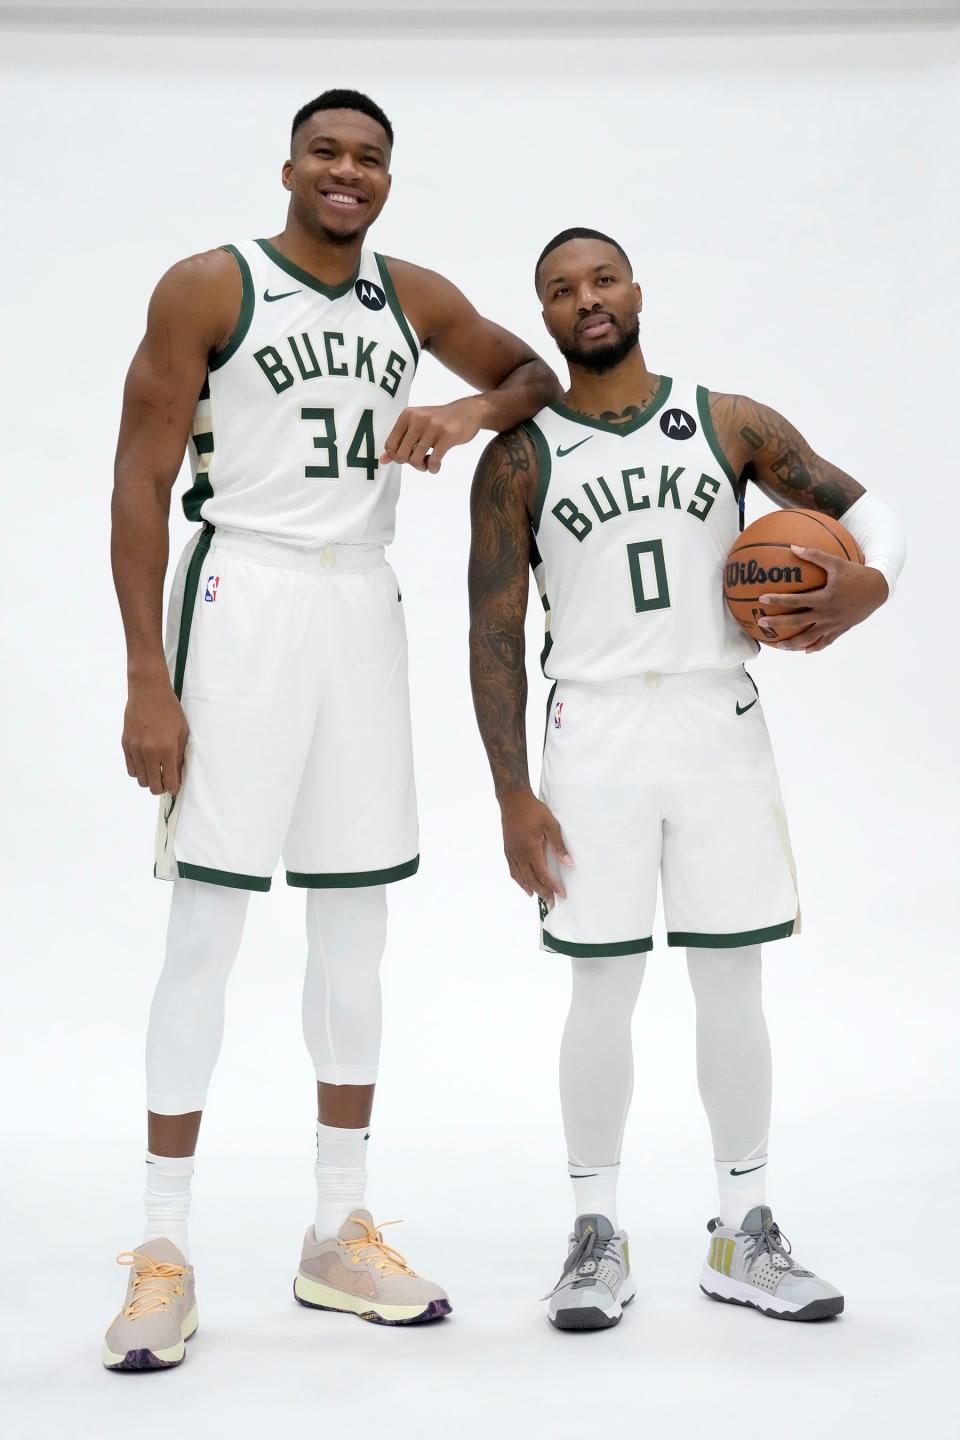 Giannis Antetokounmpo and Damian Lillard have joined forces this season with the Bucks, but the groundwork was laid more than five years ago.